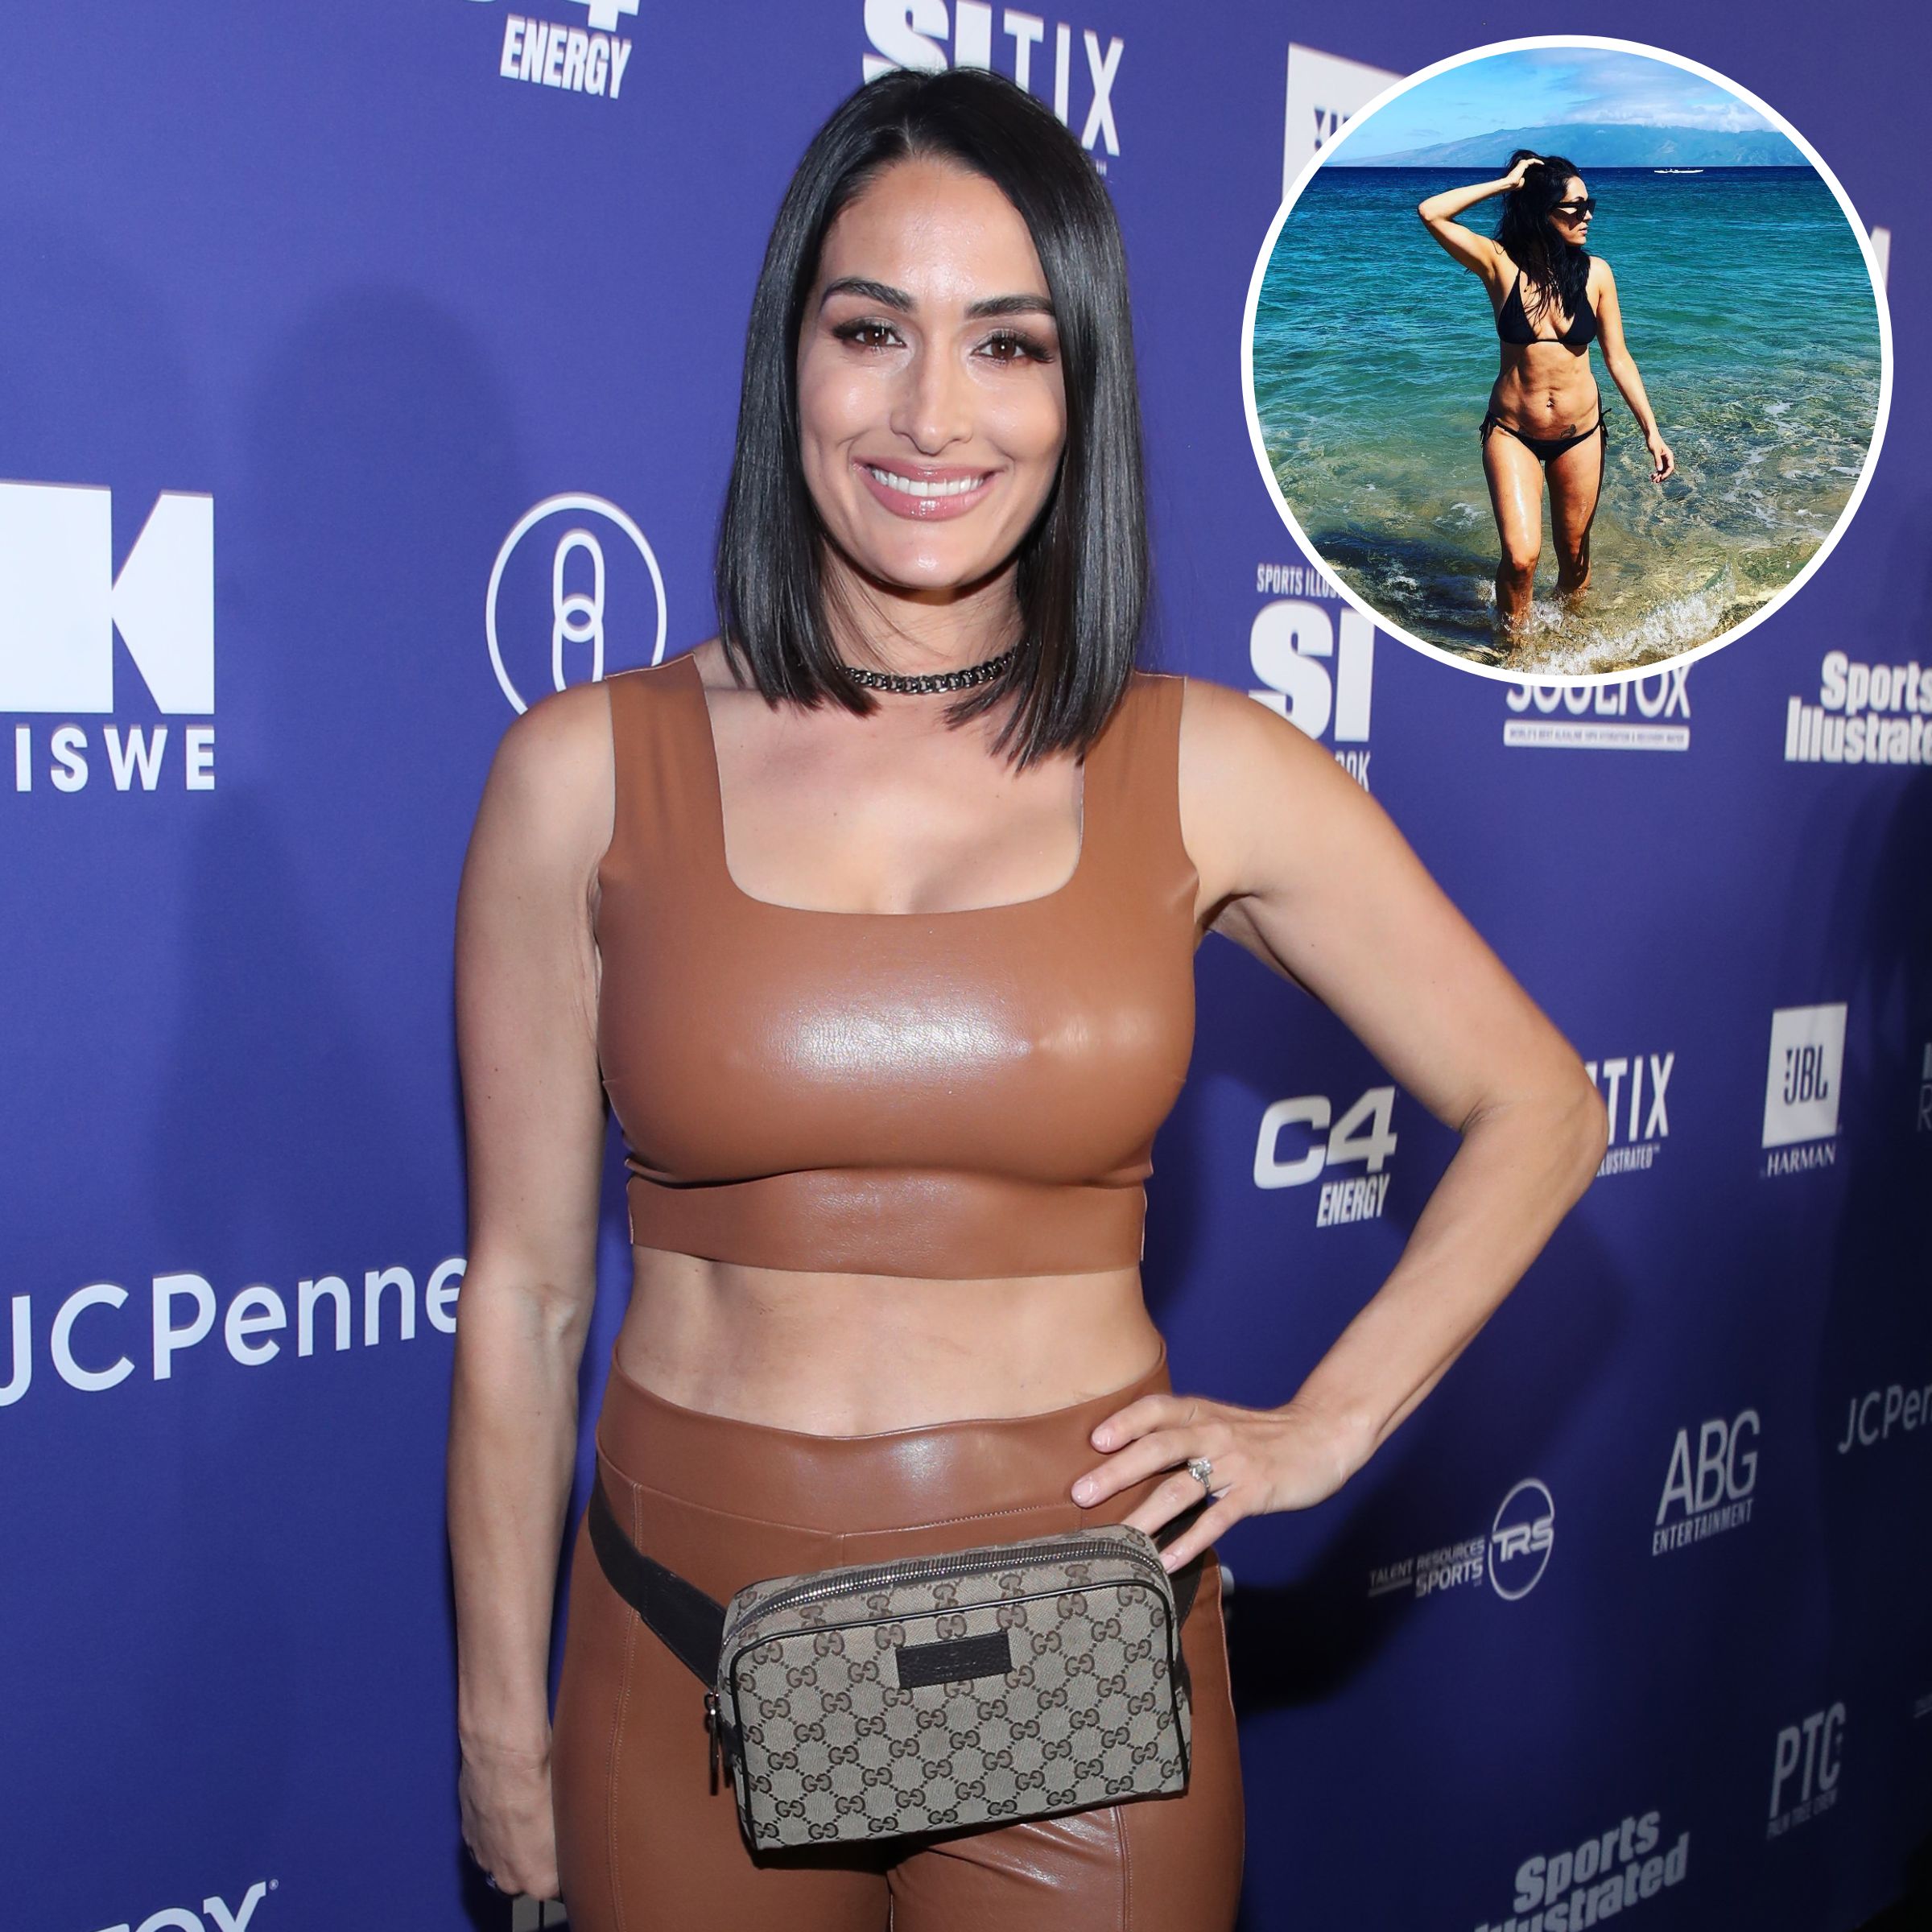 Brie Bella : Latest News - Life & Style